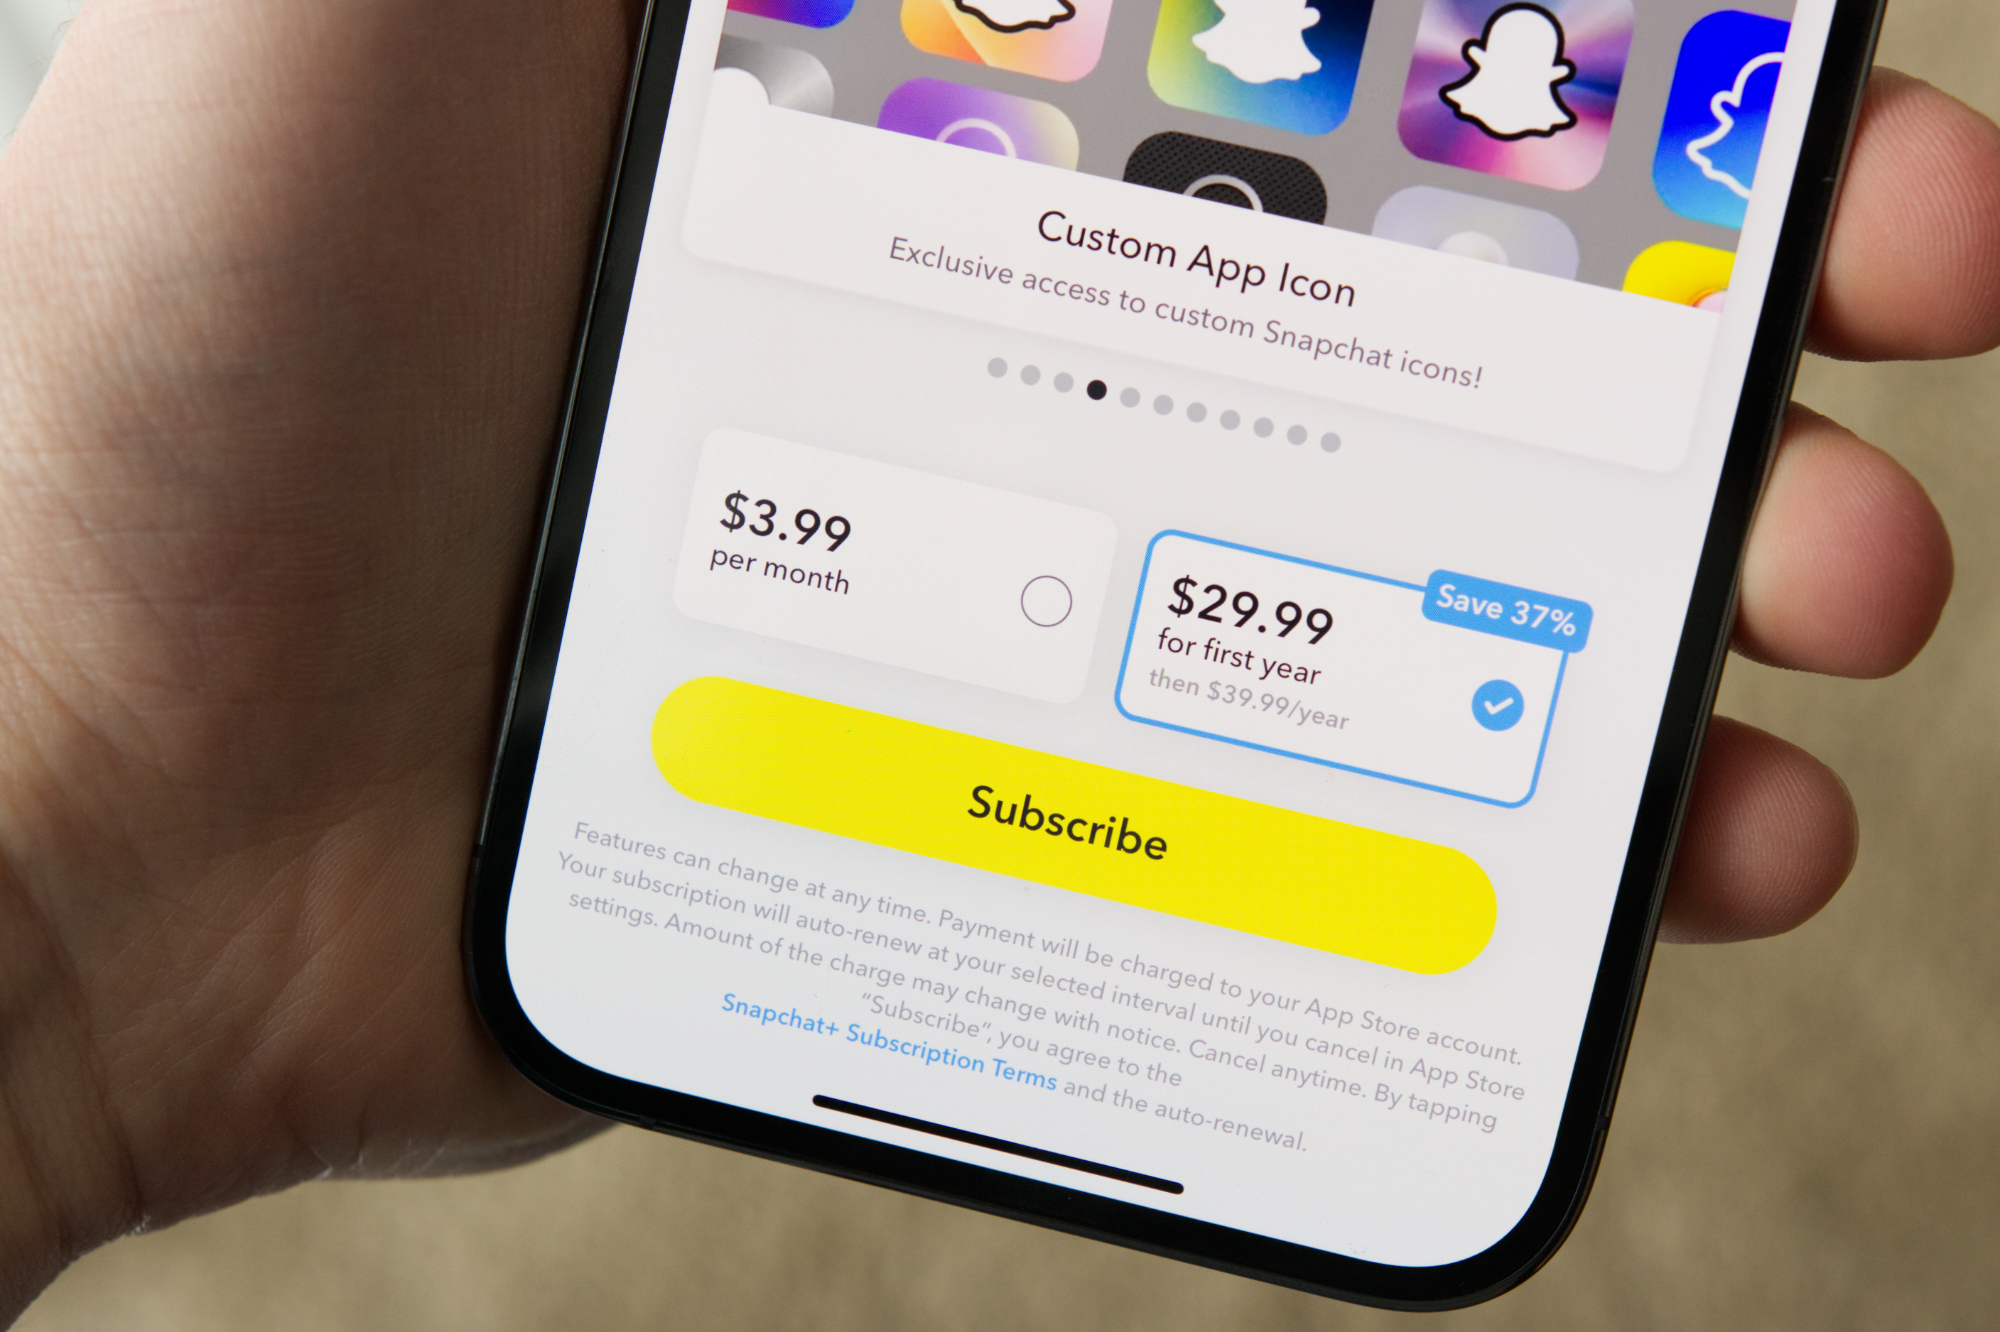 Pricing options in the Snapchat app on an iPhone.